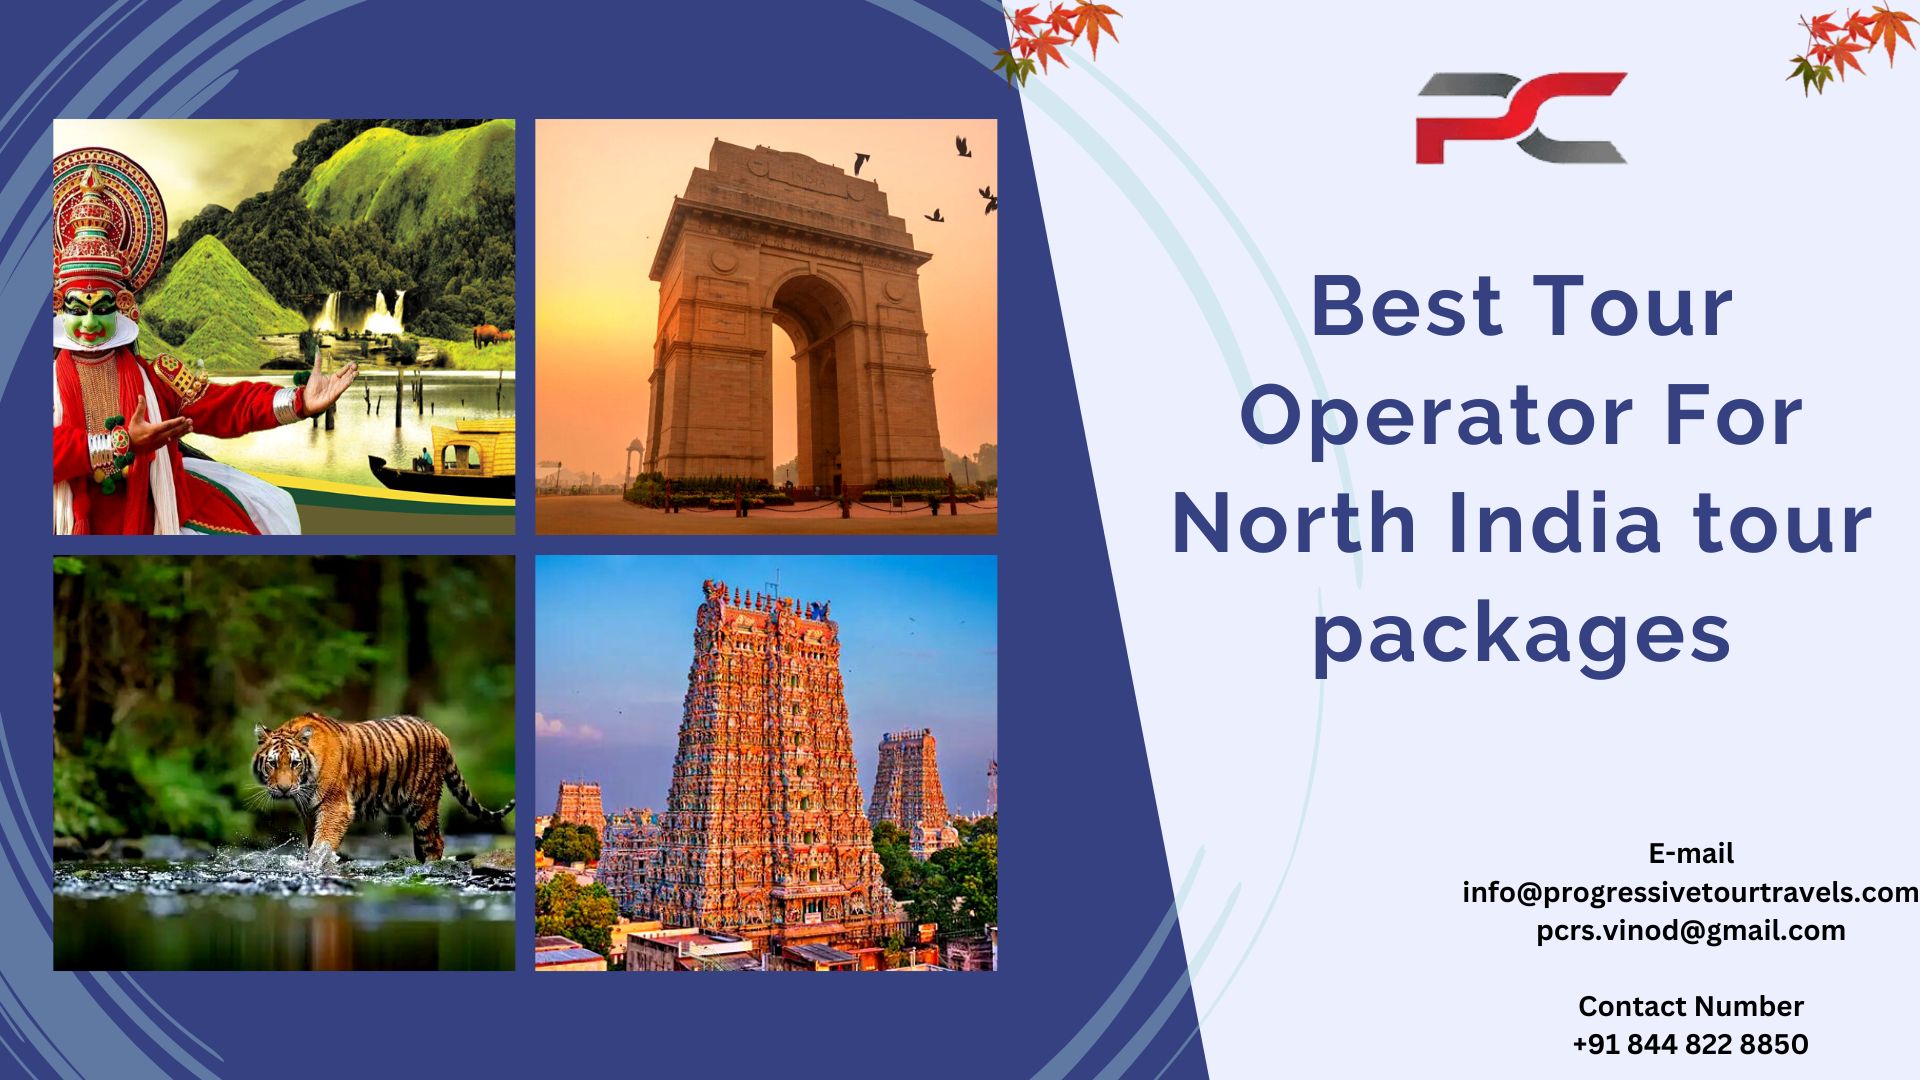 Best Tour Operator For North India tour packages-0c6aefce